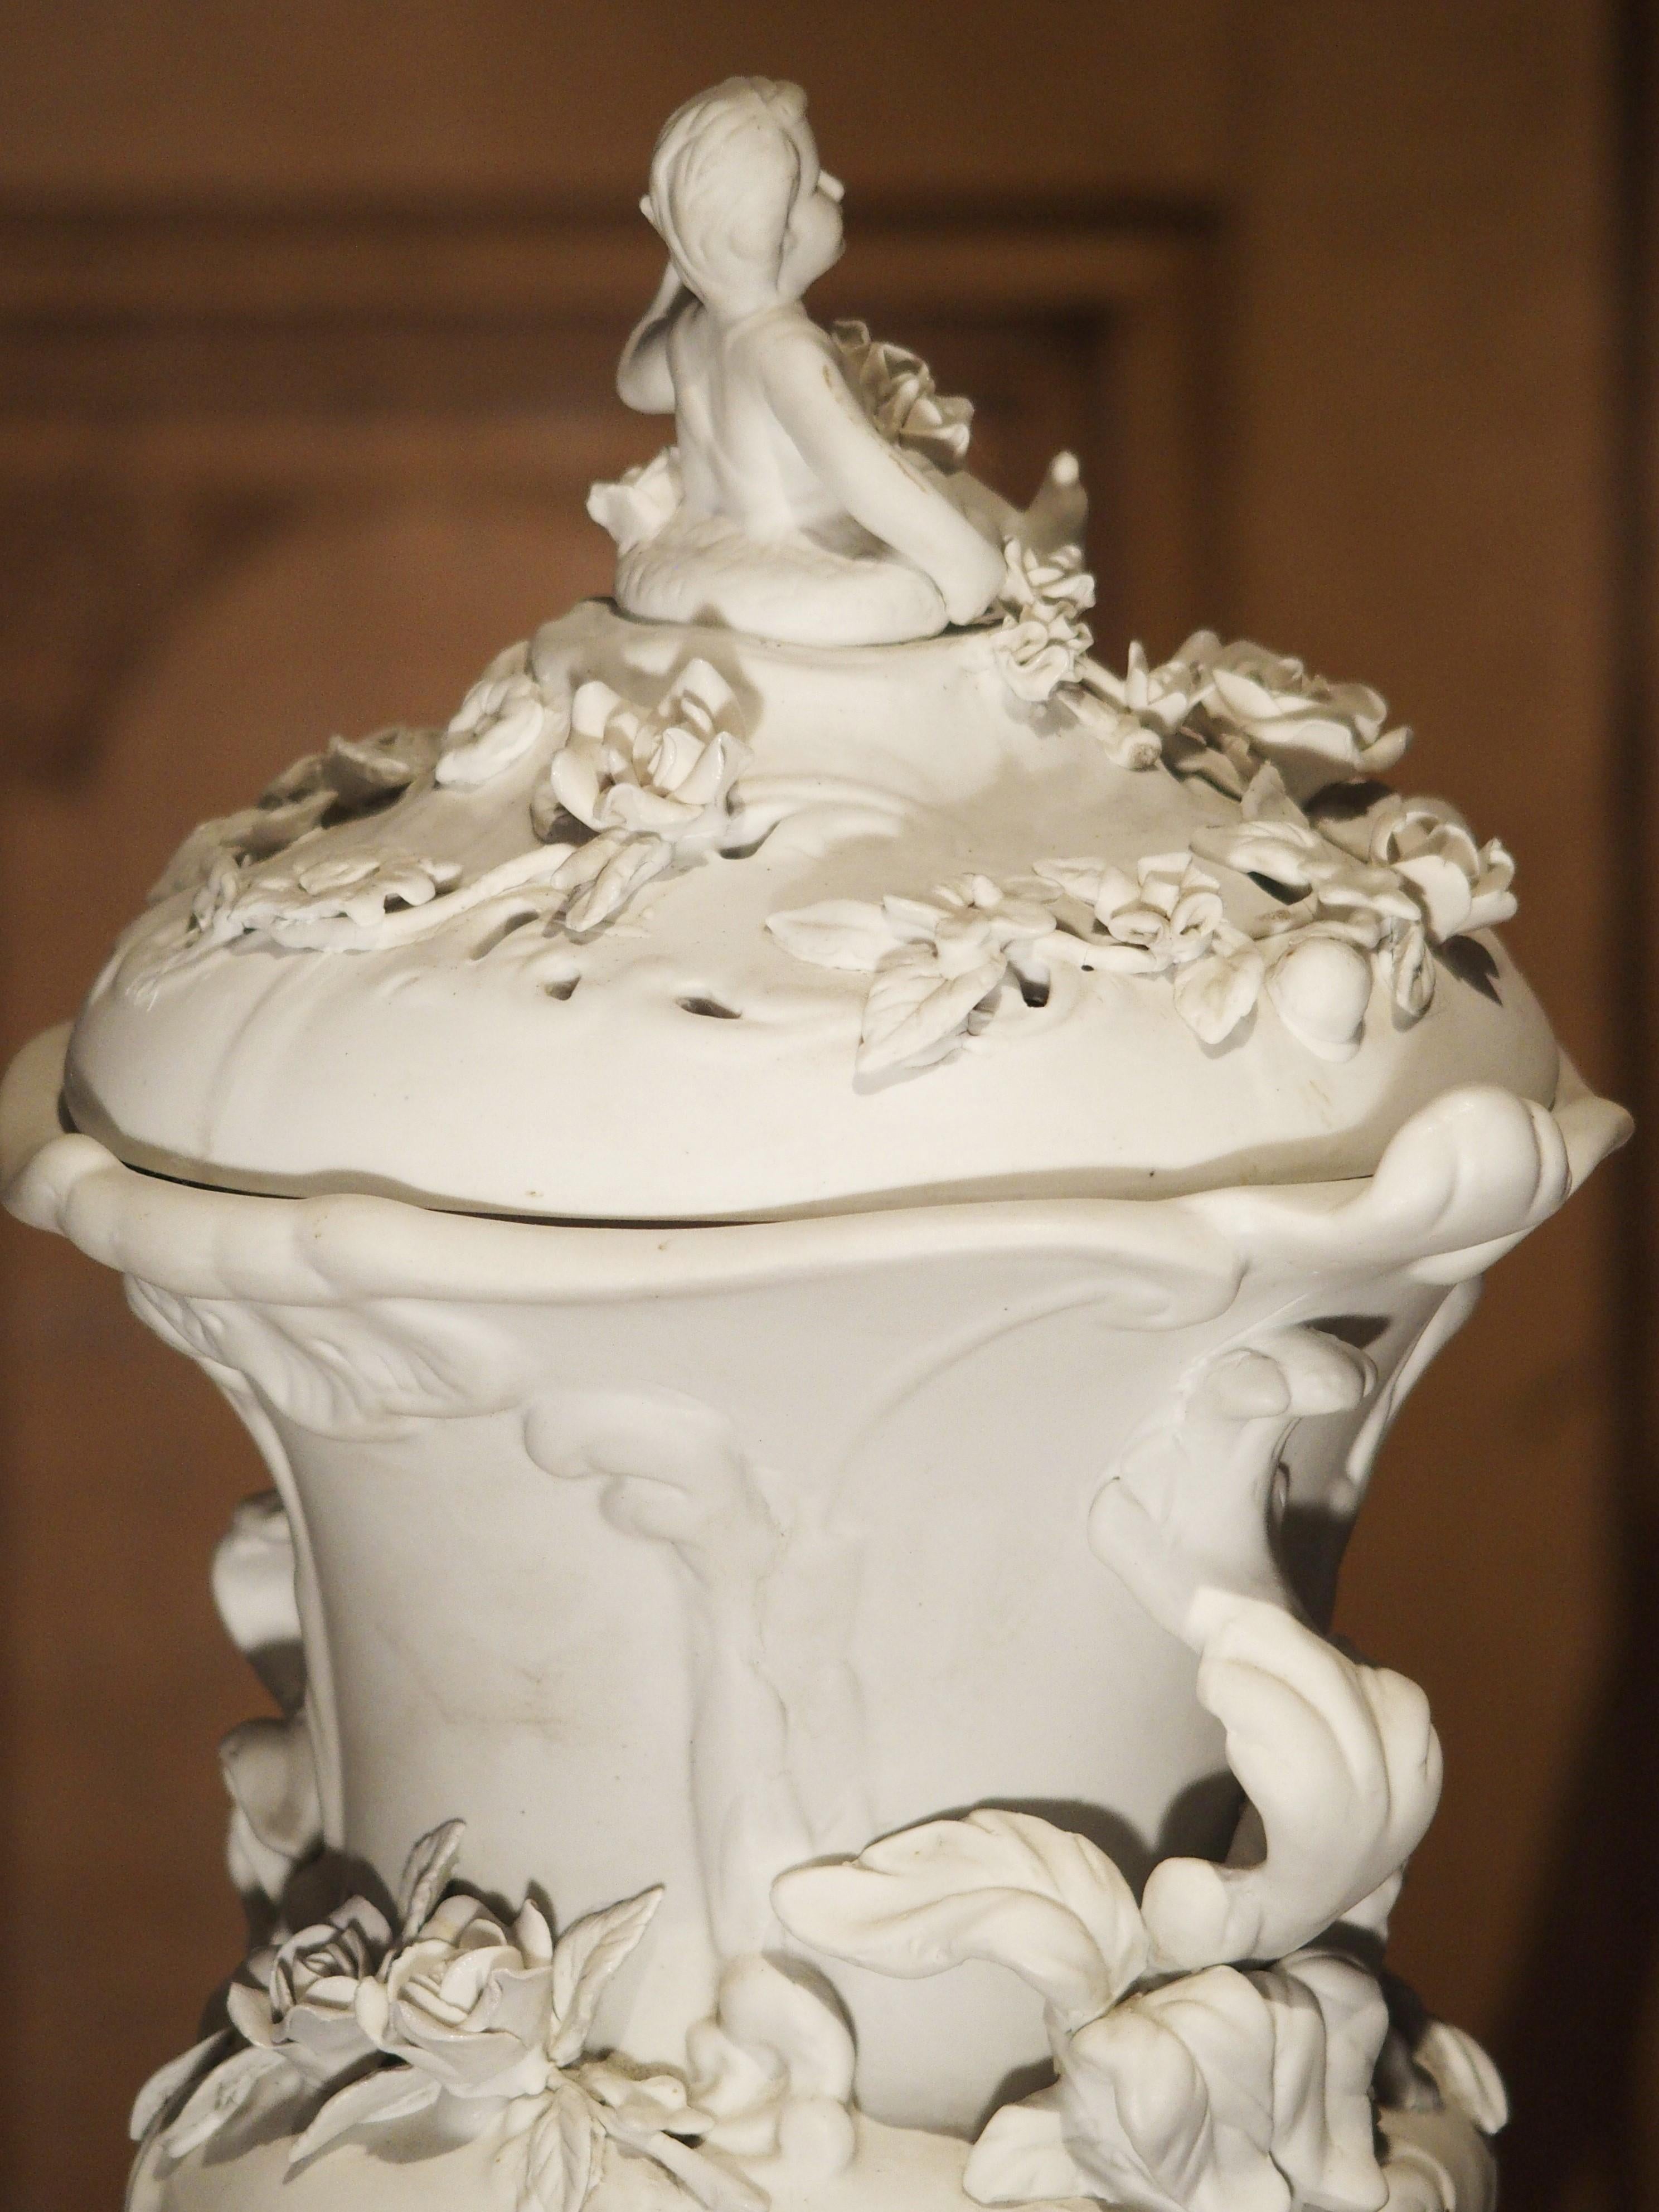 This magnificent antique French bisque piece is a tabletop lidded urn on a tripod pedestal. It features gros relief motifs of cherubs, foliate and floral vines, drapery with tassels, roses, cartouches and more. With a height of almost 23 inches,